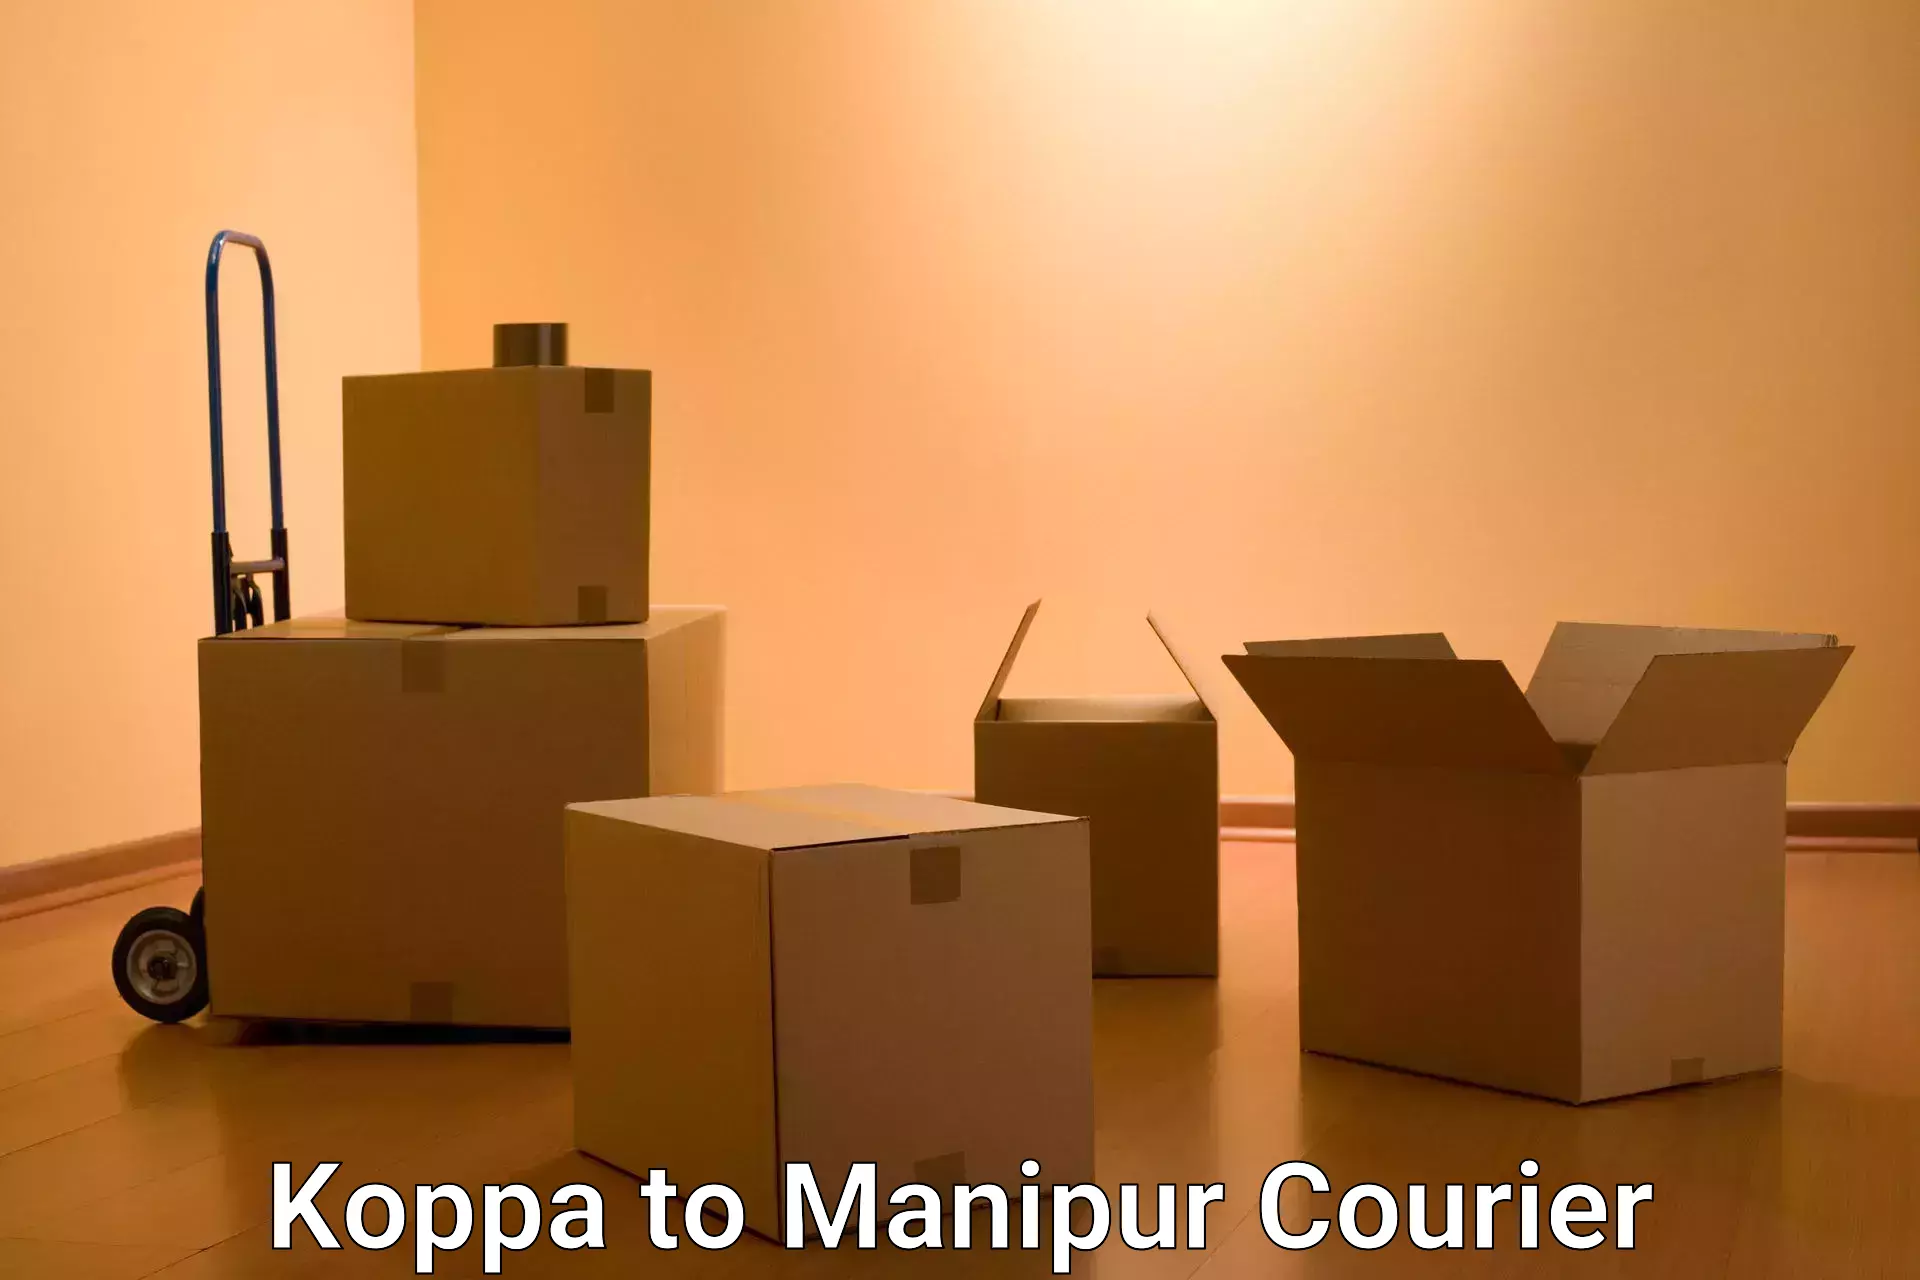 Sustainable courier practices Koppa to Manipur